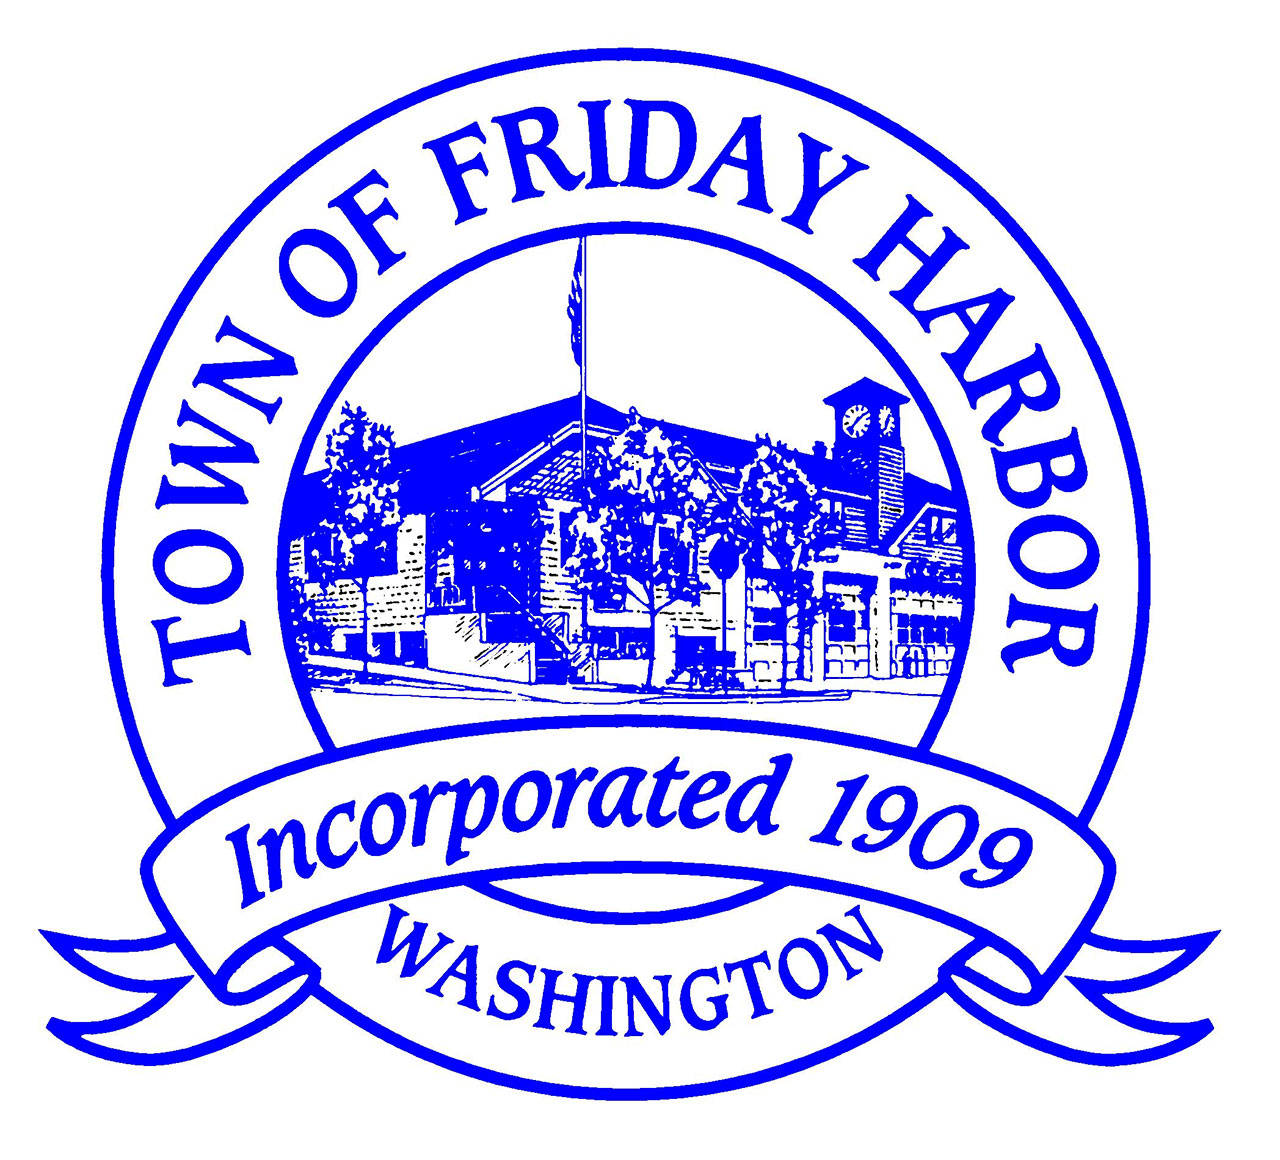 Lodging tax grant funds available to promote 2019 Friday Harbor tourism